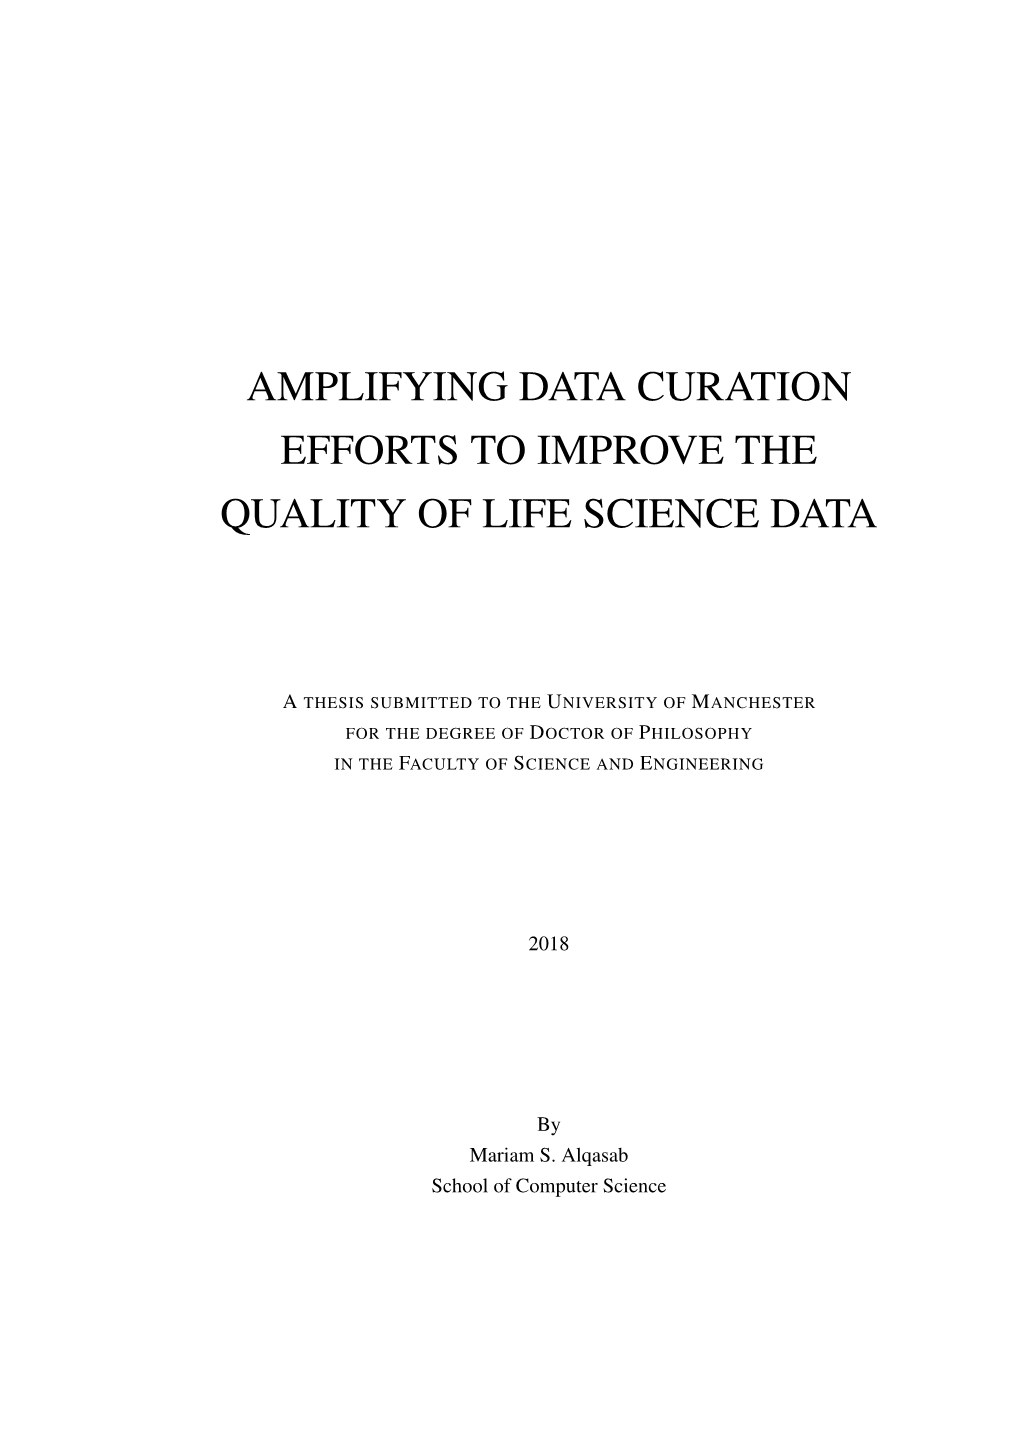 Amplifying Data Curation Efforts to Improve the Quality of Life Science Data